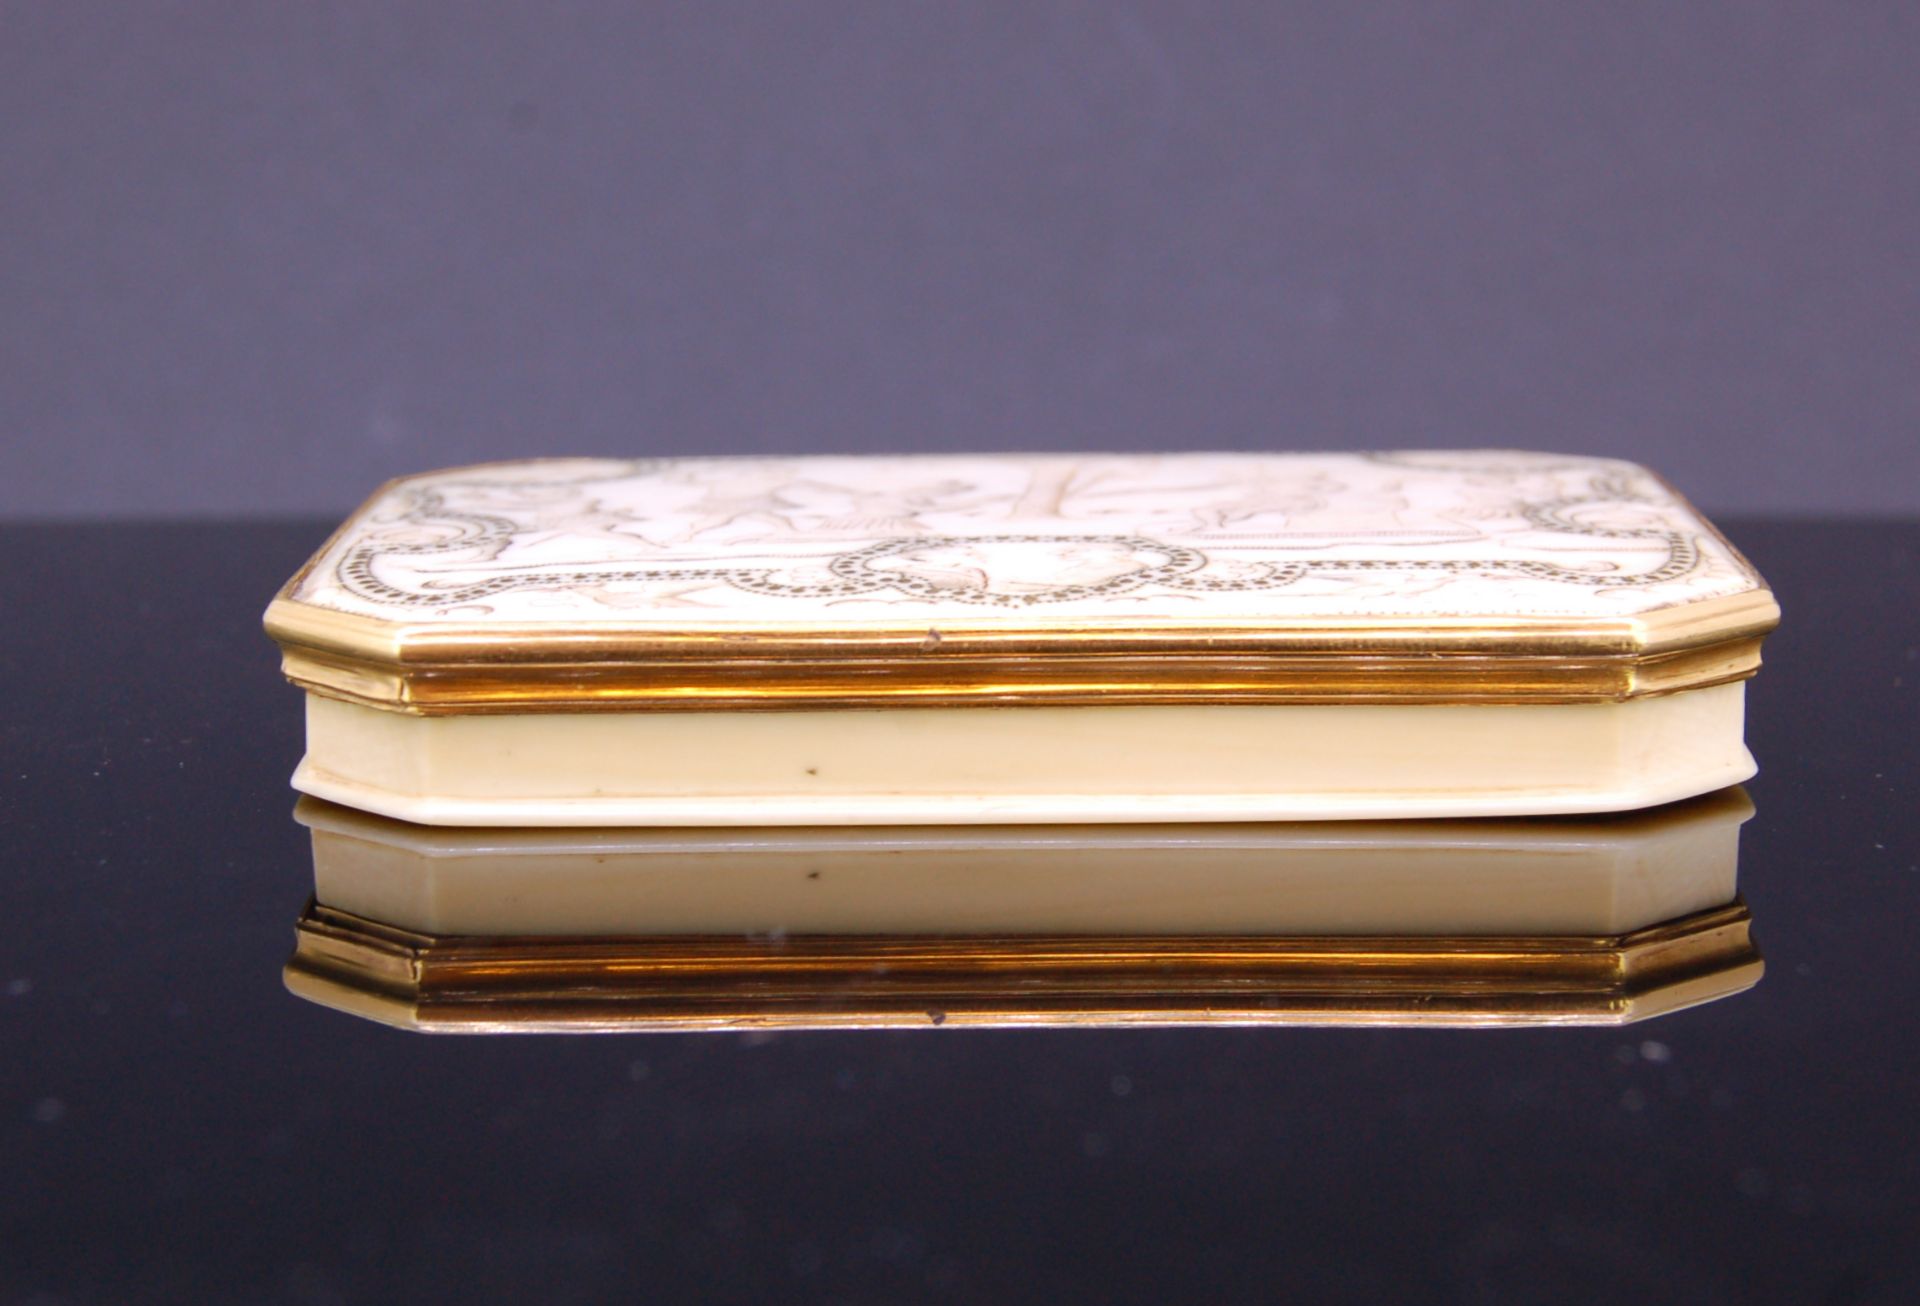 18th CENTURY RECTANGULAR SNUFFBOX WITH GOLD MOUNT - Image 2 of 4